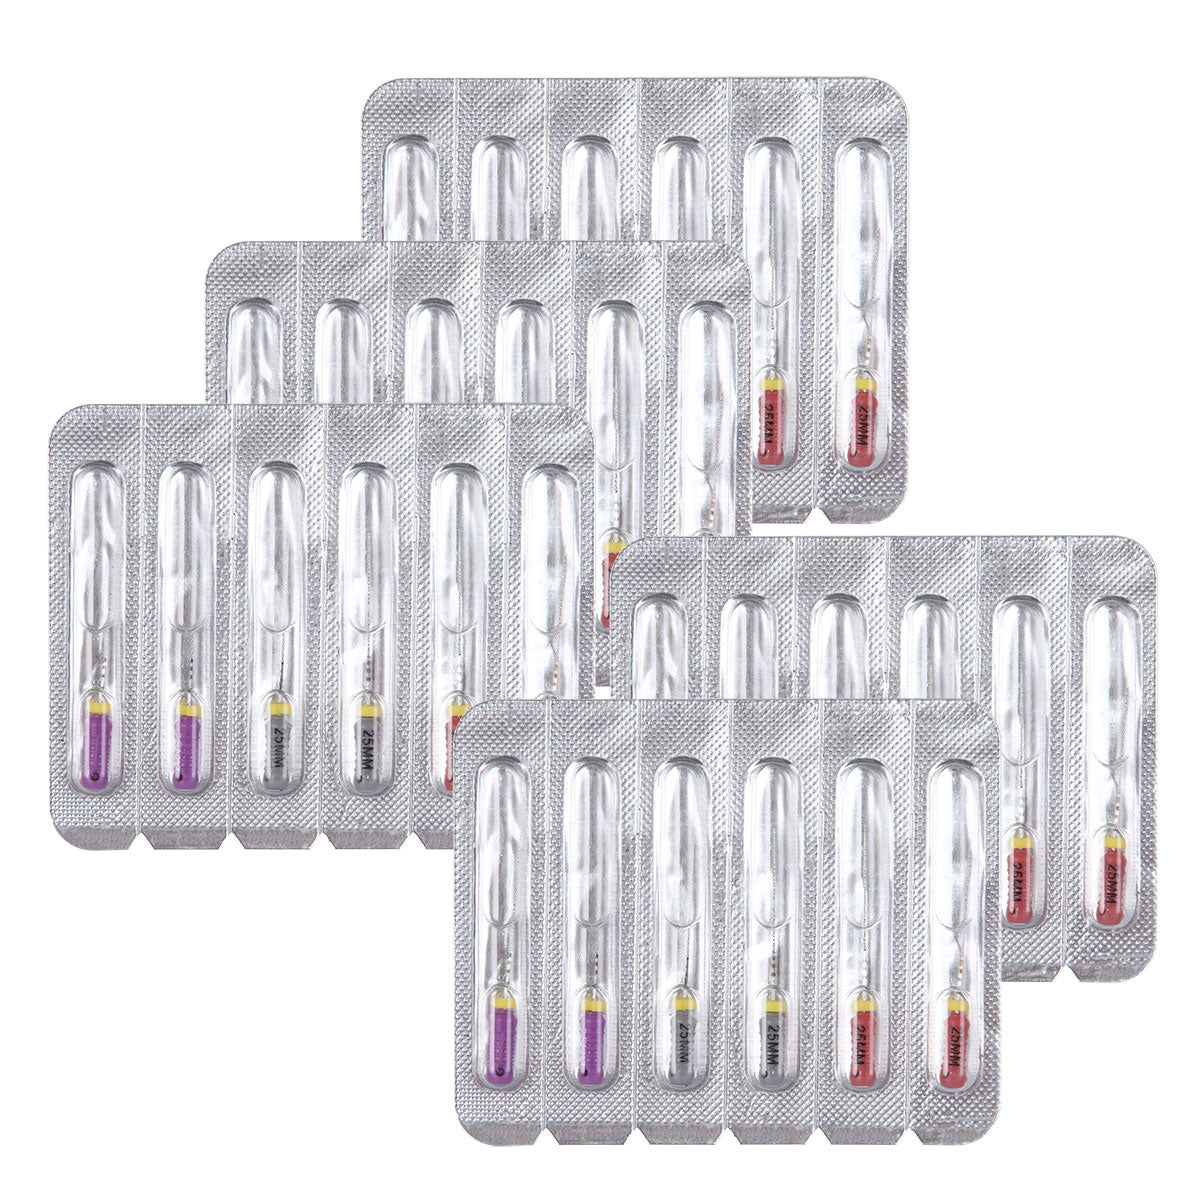 Dental C Files Hand Use Stainless Steel 25mm Assorted #6-10 6pcs/Pack-azdentall.com